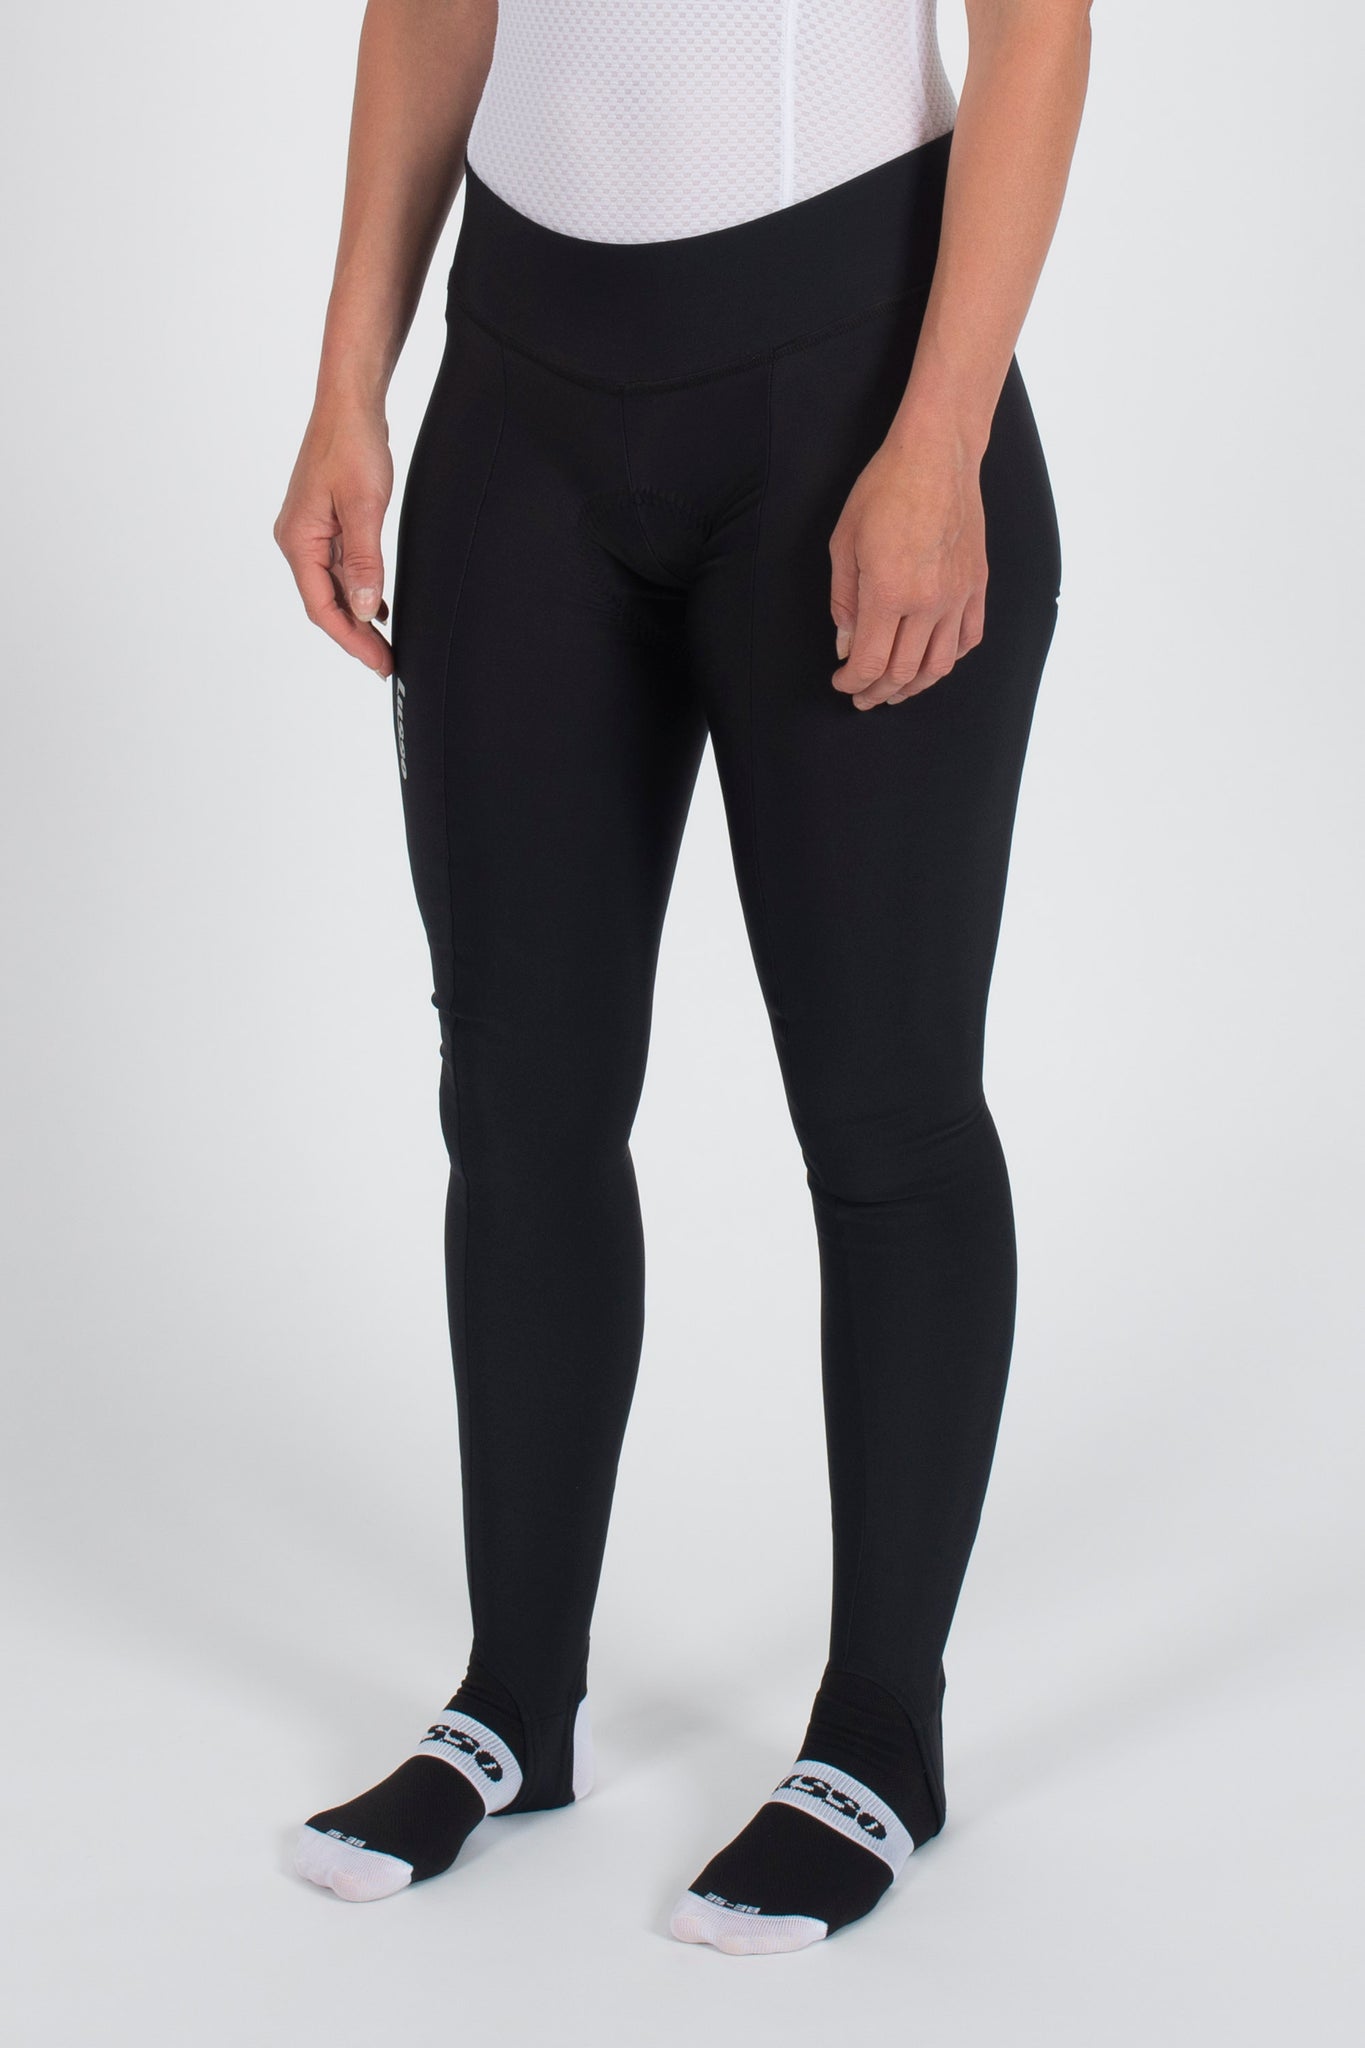 Women's thermal tights - with foot loops - Lusso Cycle Wear